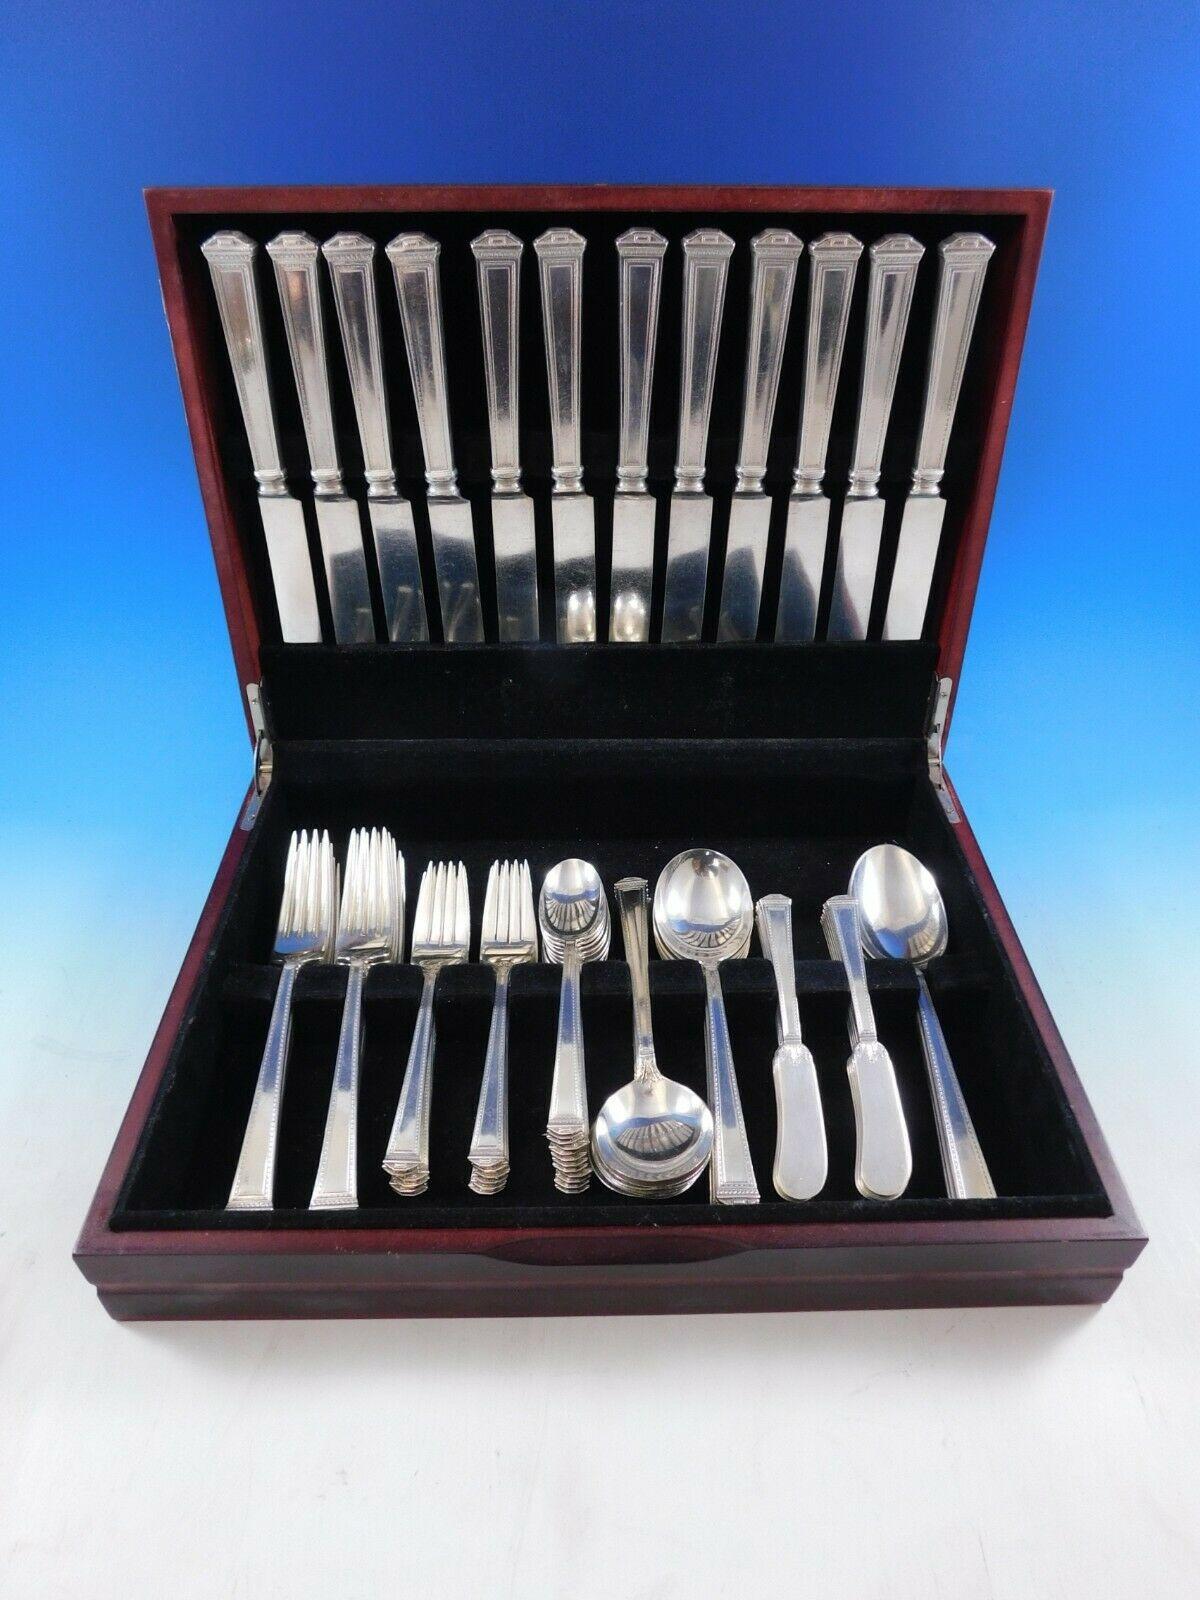 Dinner size Pantheon by International sterling silver flatware set, 75 pieces. This set includes:


12 dinner size knives, 9 3/4